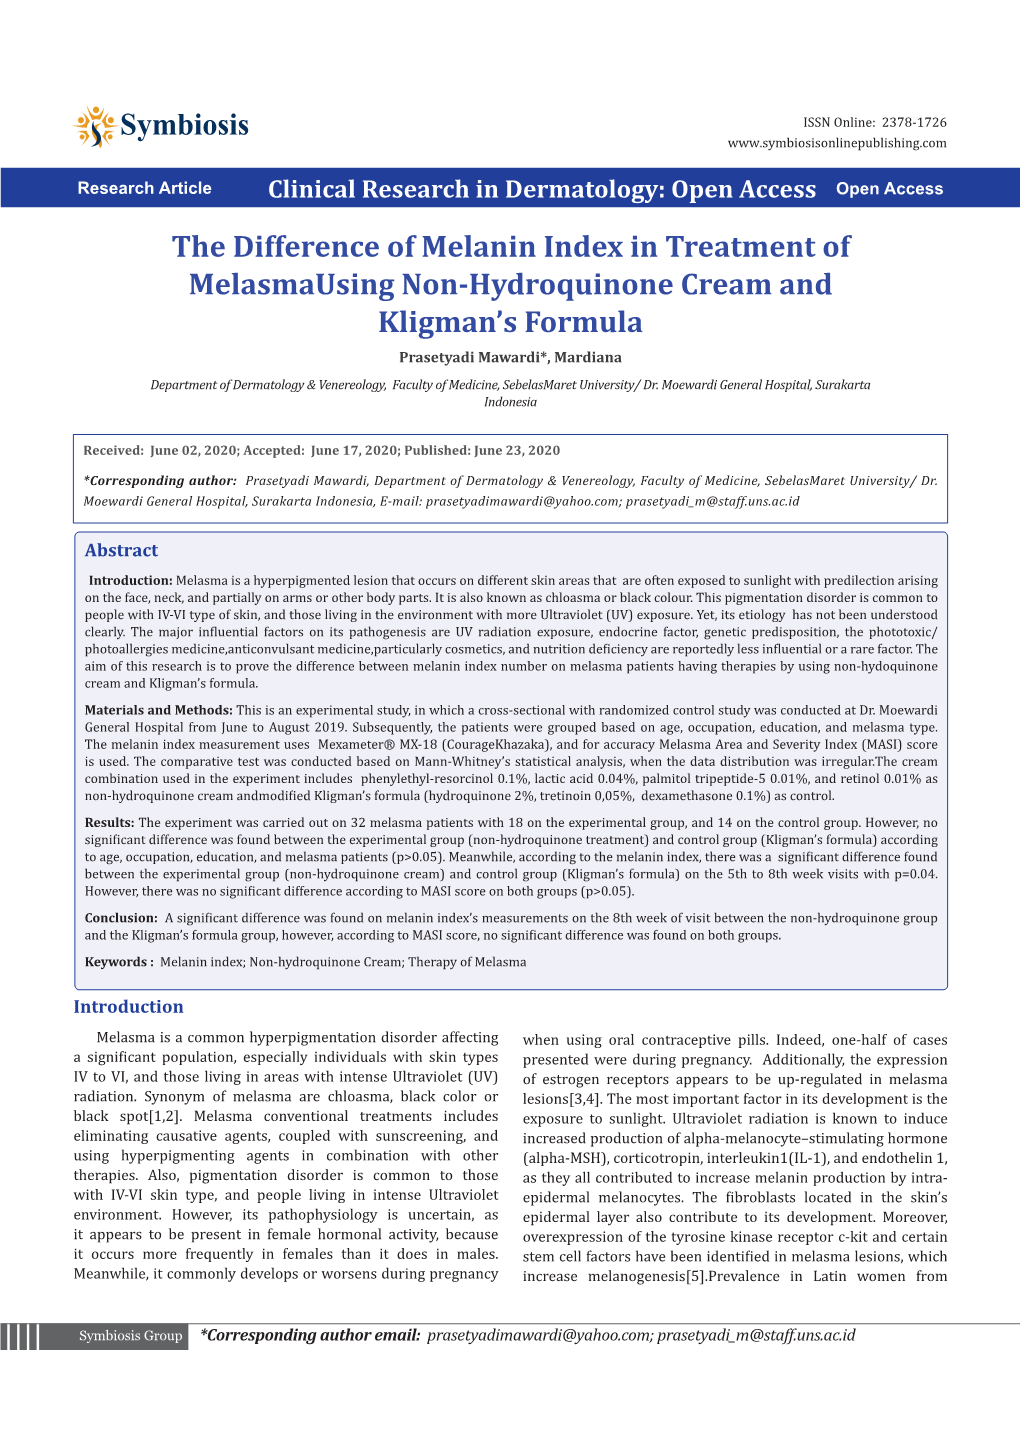 The Difference of Melanin Index in Treatment of Melasmausing Non-Hydroquinone Cream and Kligman's Formula